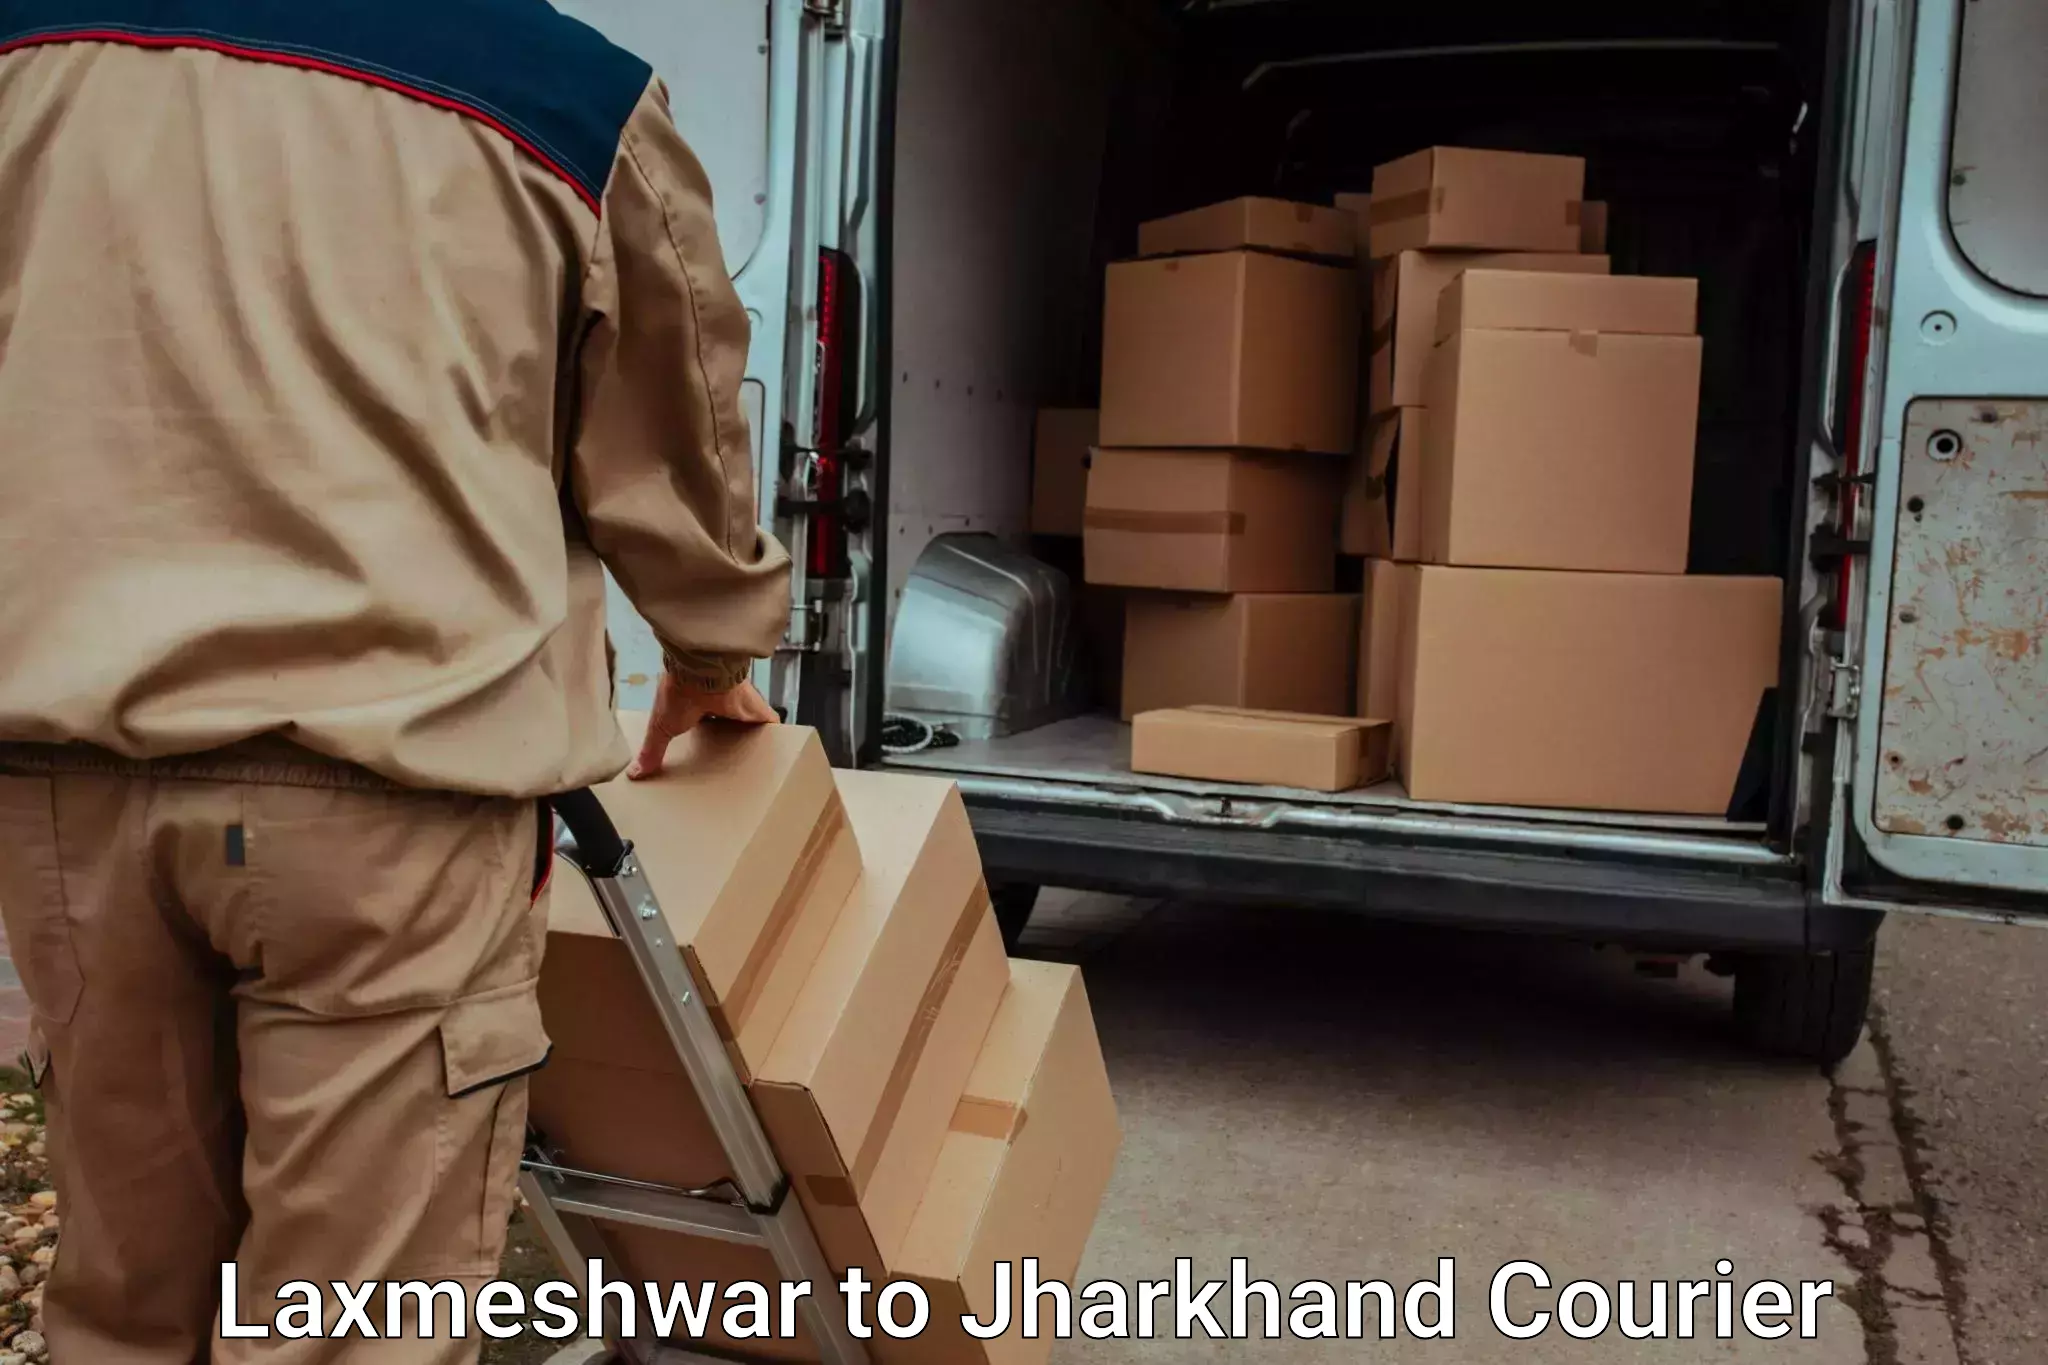 Luggage shipment specialists Laxmeshwar to Jharkhand